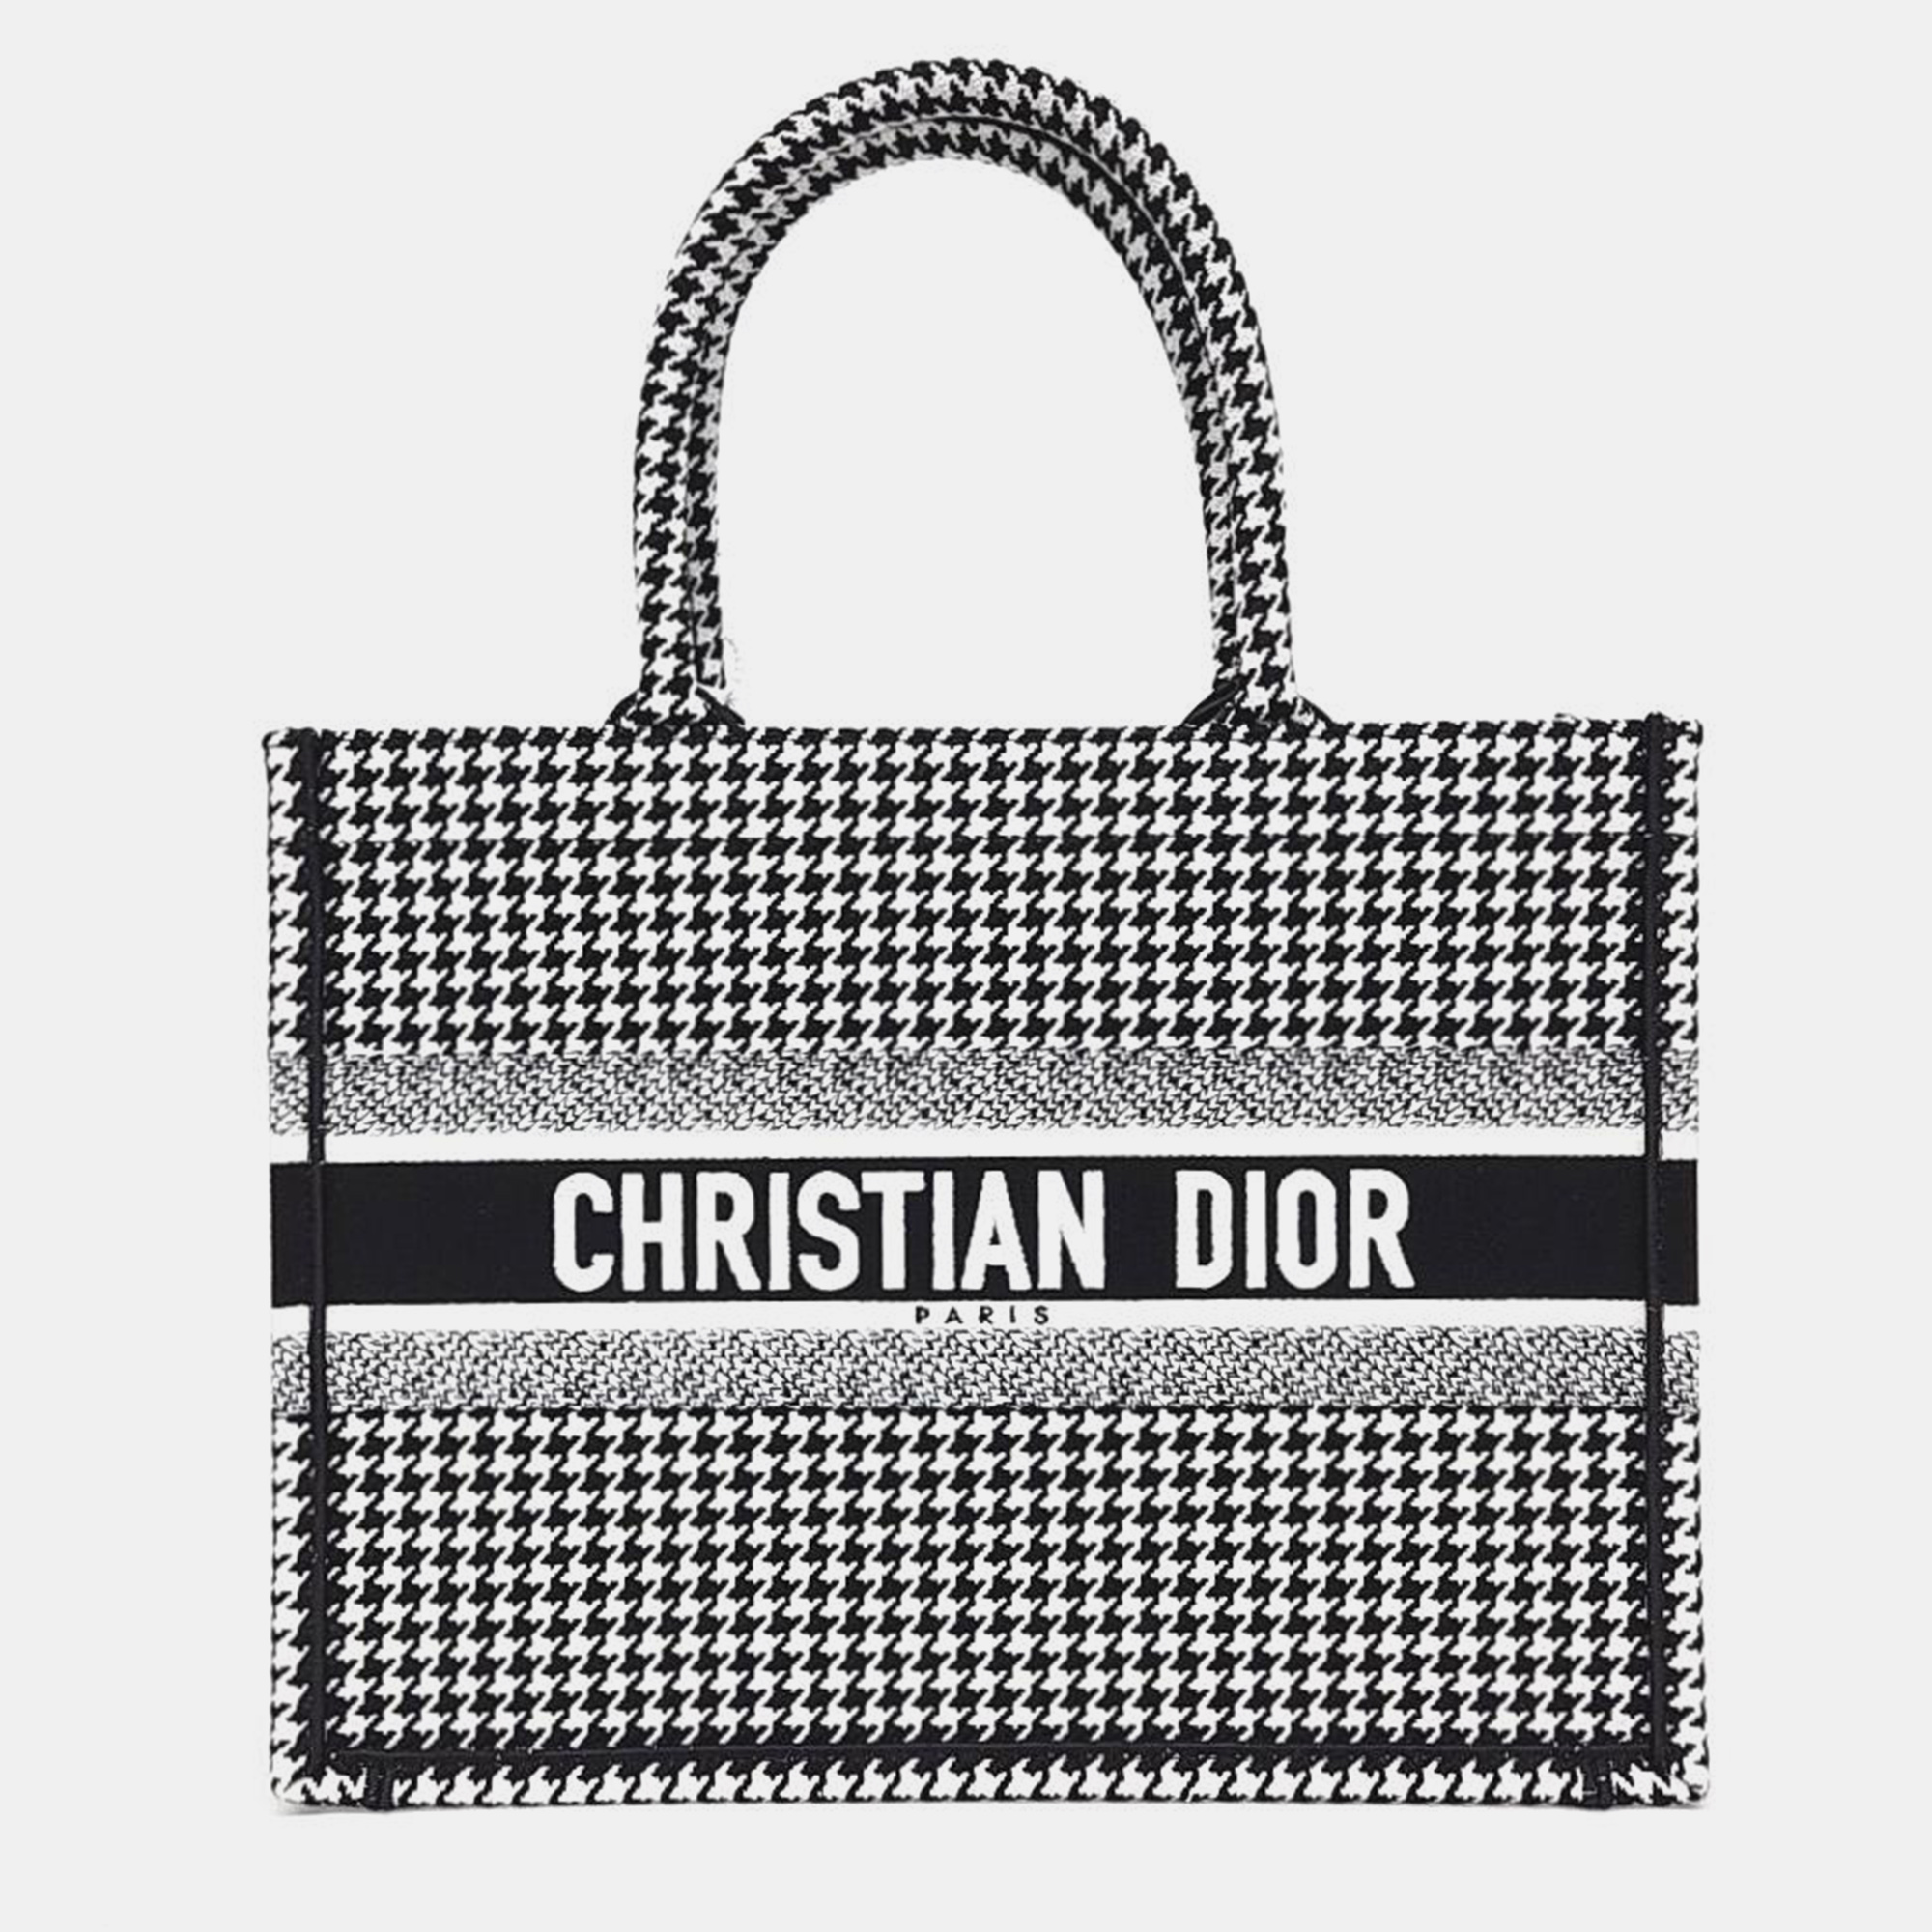 Indulge in the epitome of luxury with an authentic Dior tote. Exquisite craftsmanship premium materials and the iconic Dior motifs combine for an unparalleled fashion statement.